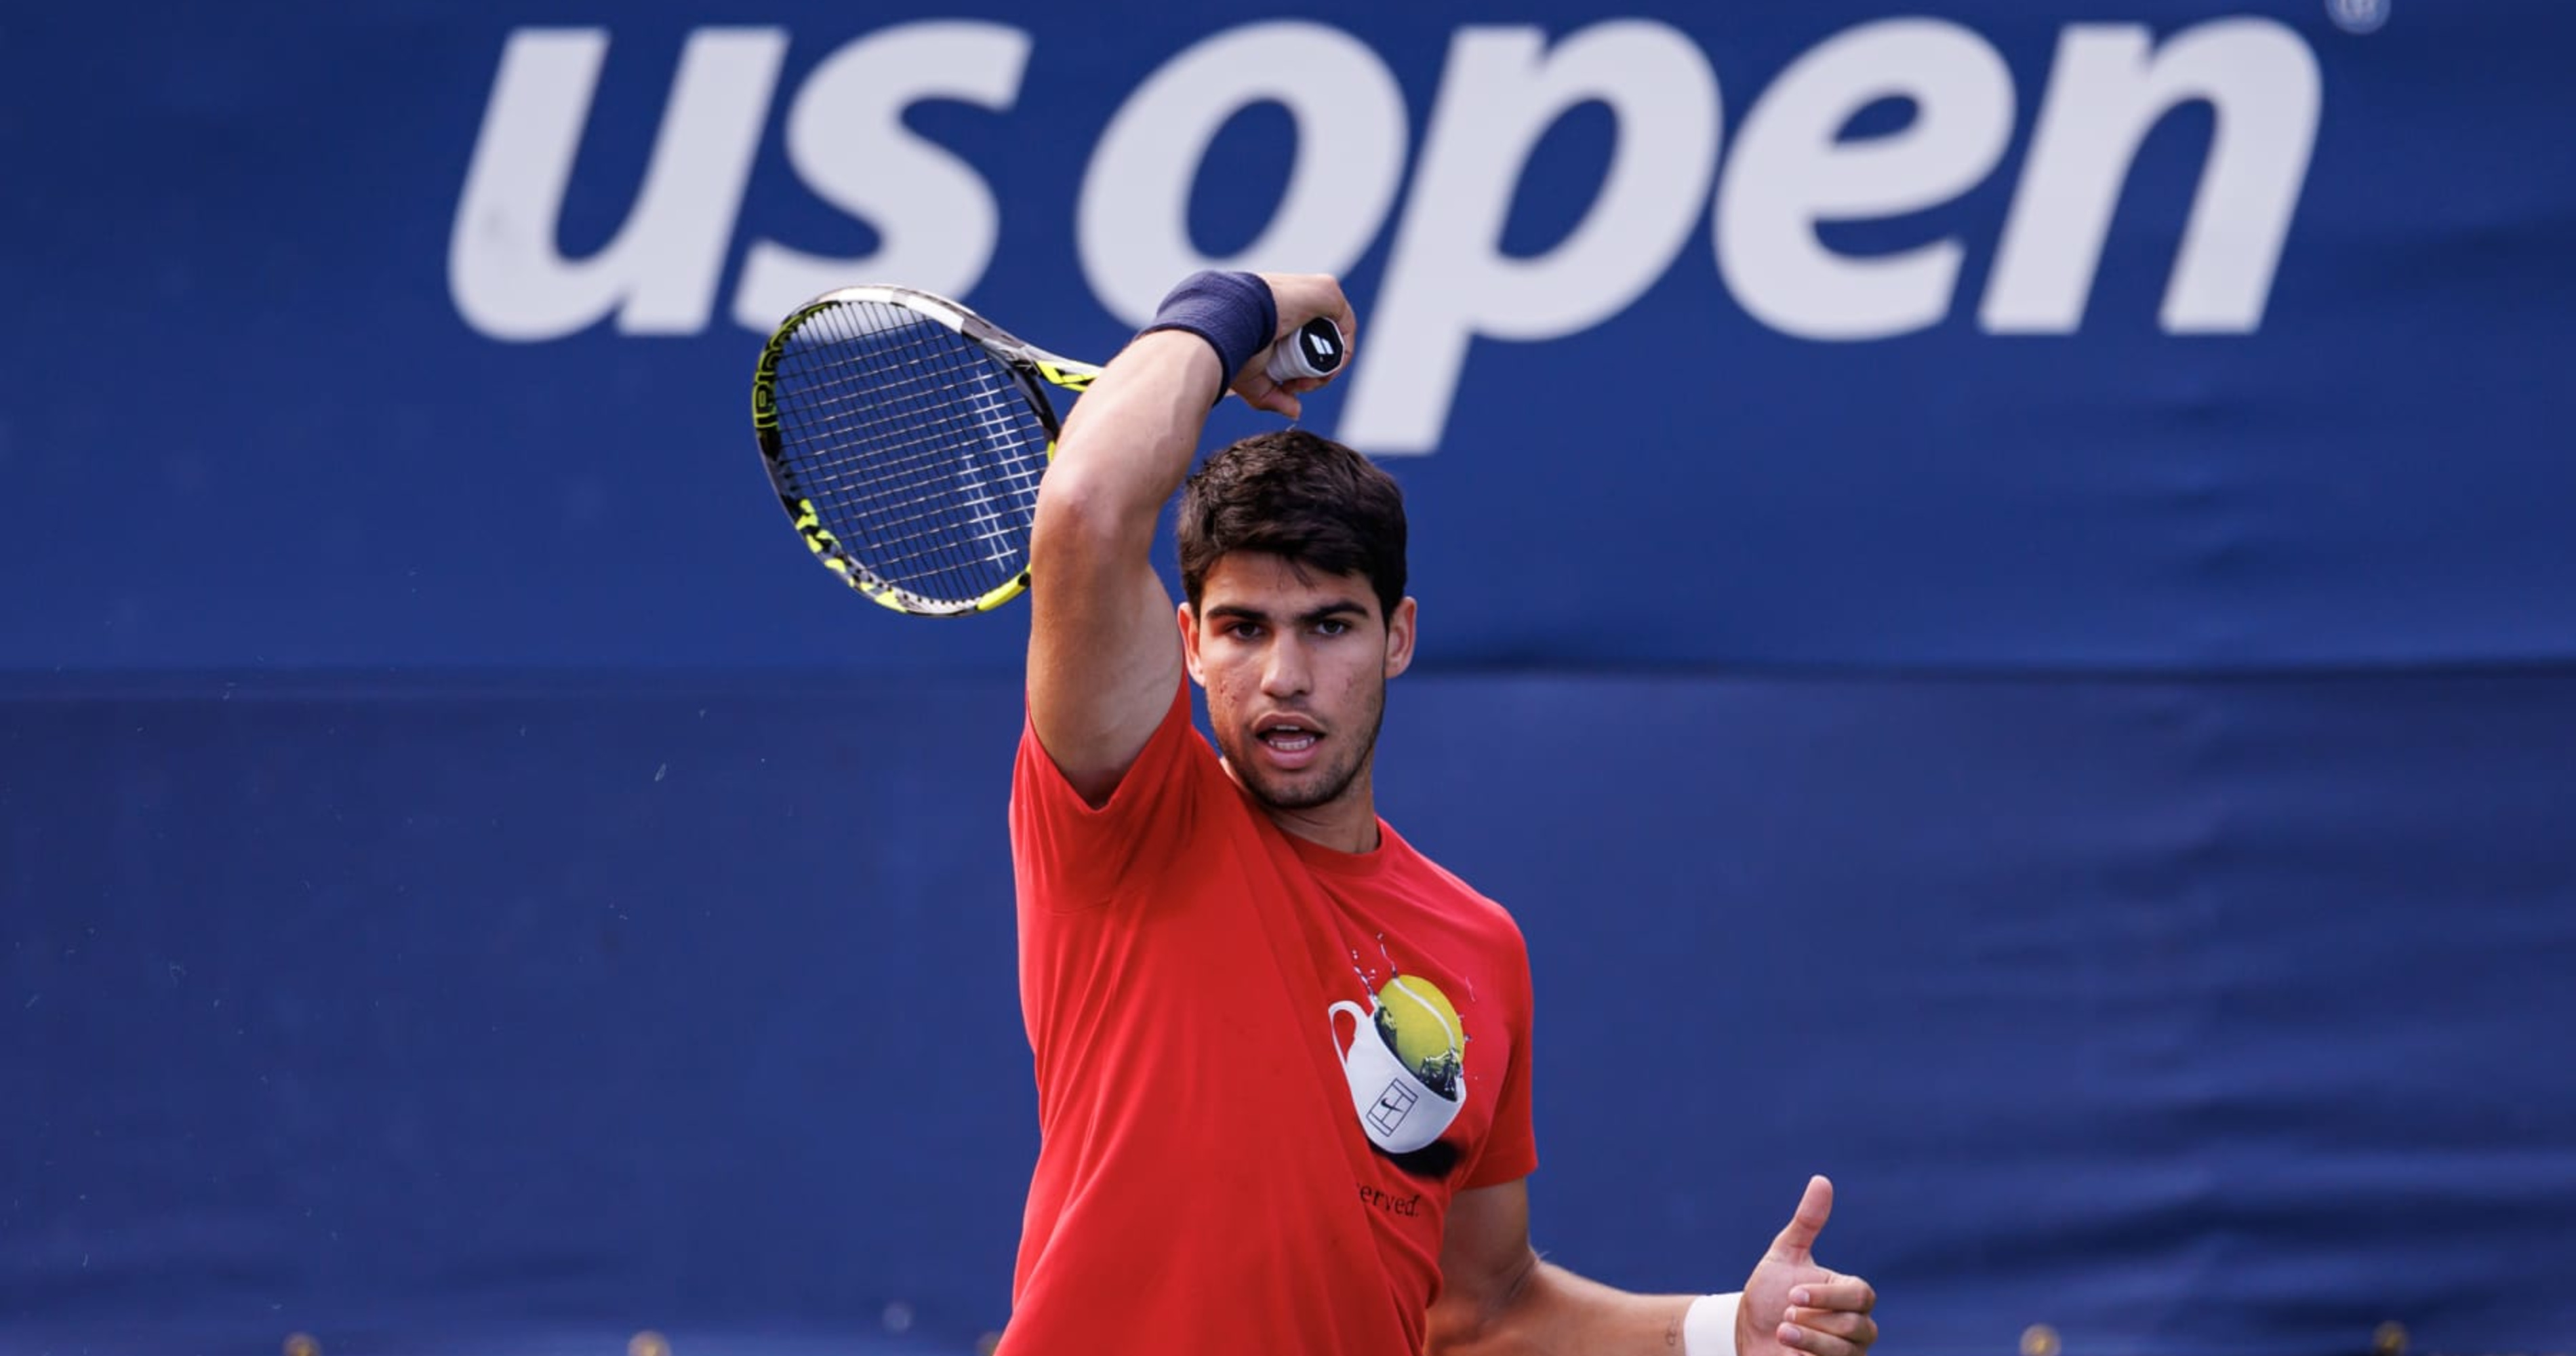 Alcaraz tops prize money list in 2022, becomes 5th ATP player to